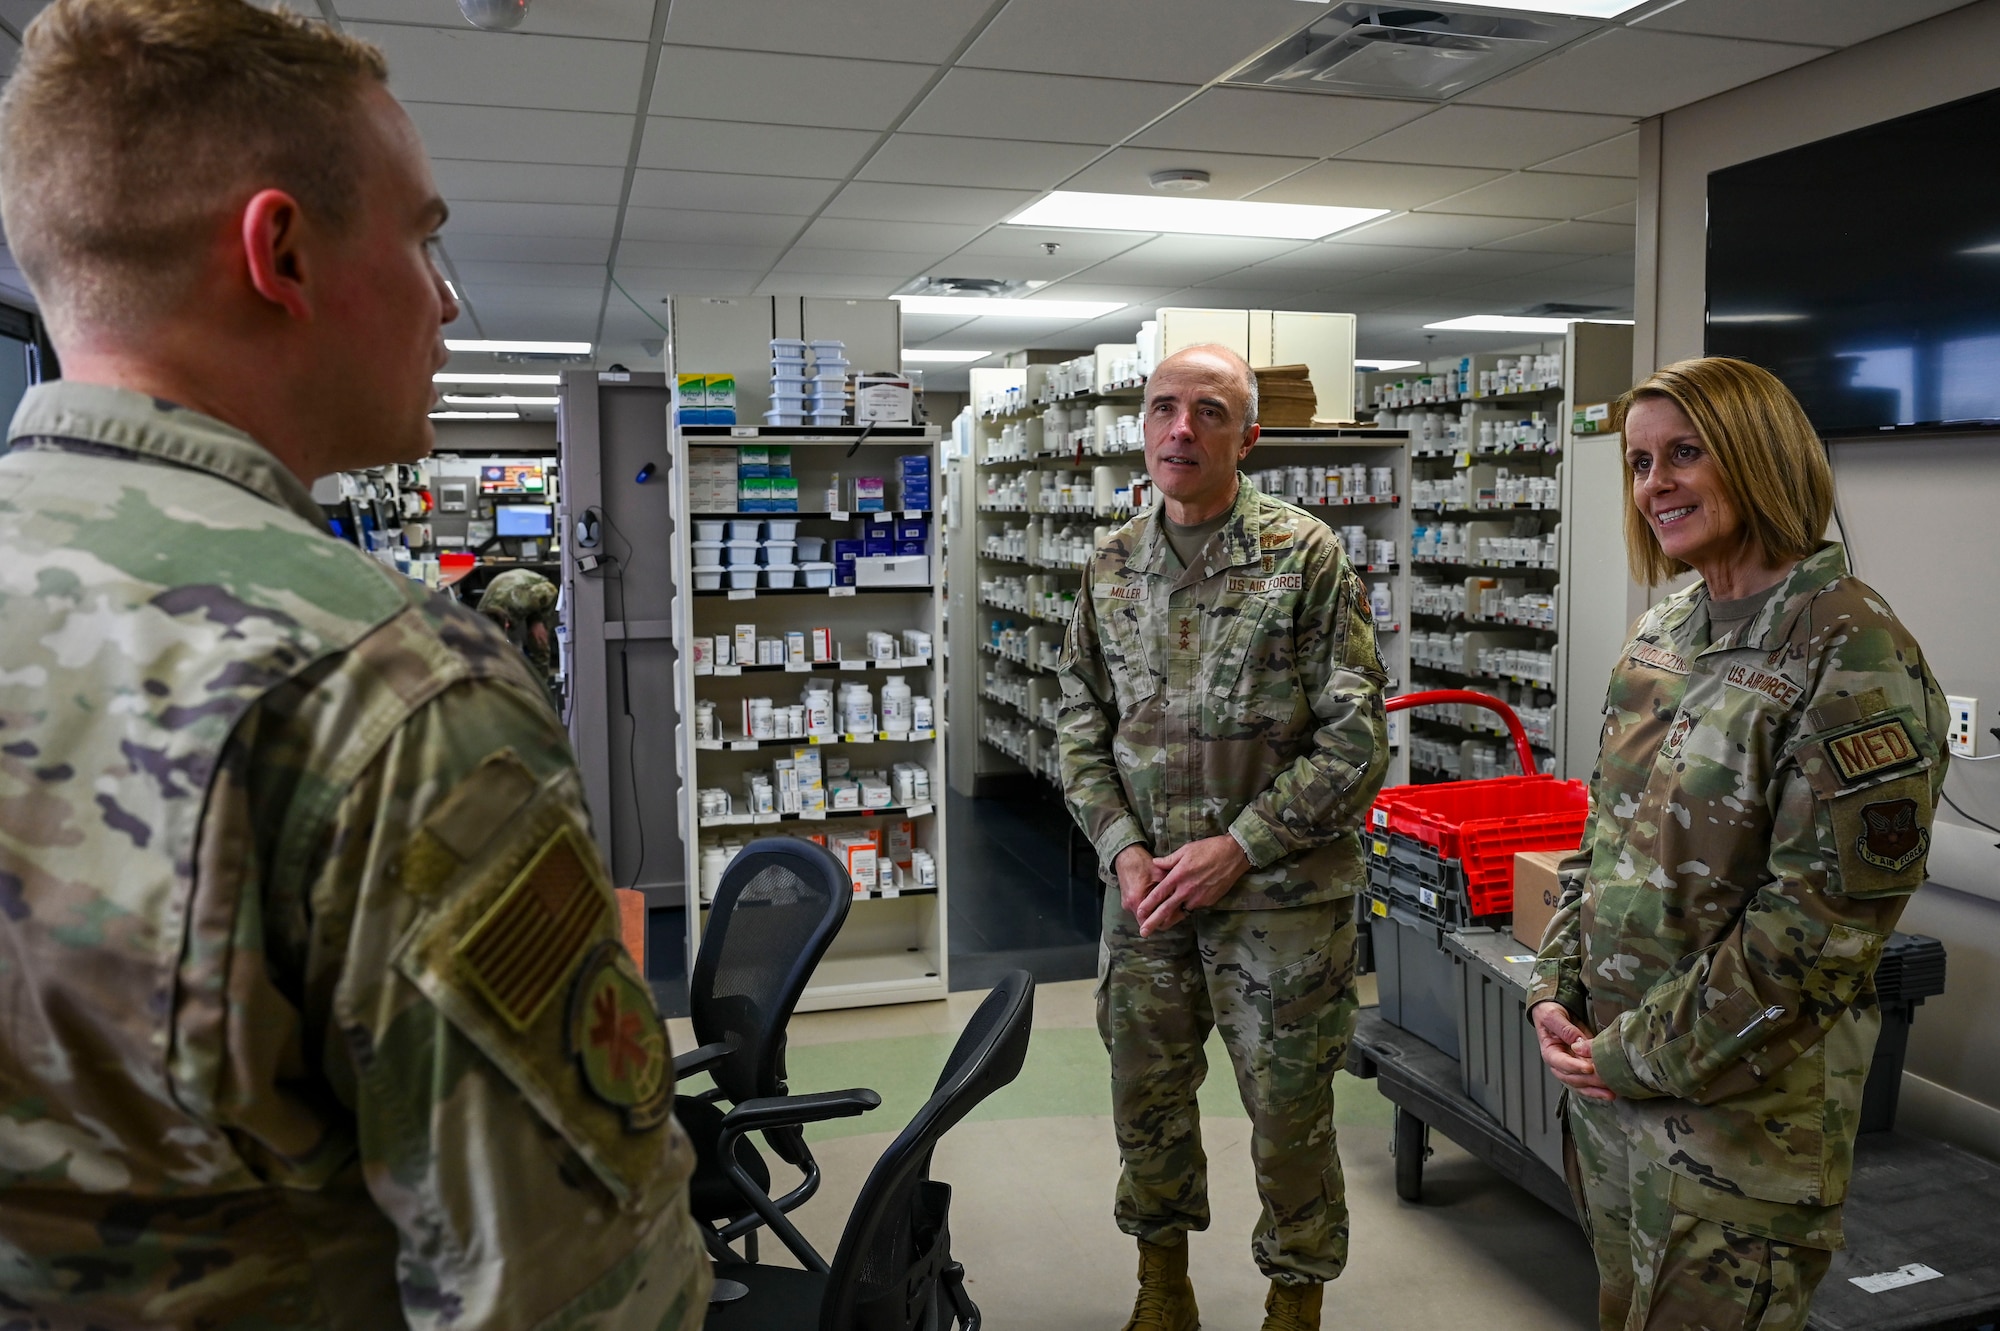 Air Force personnel talk in a pharmacy.